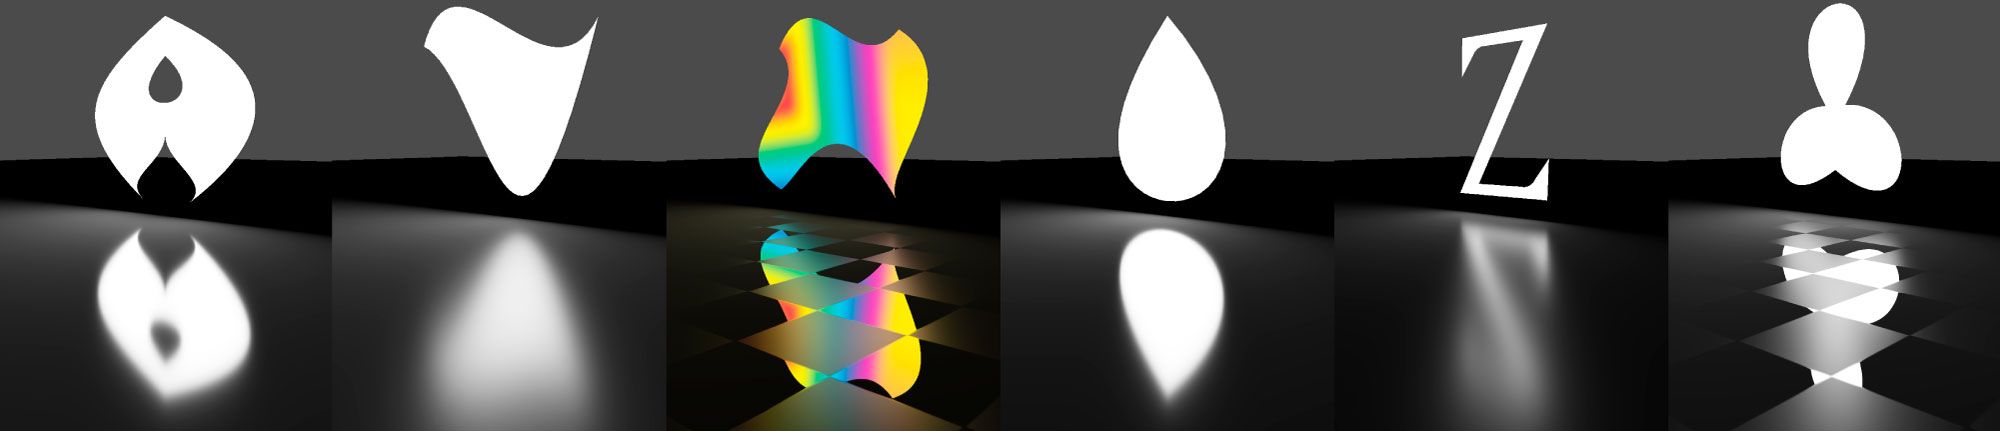 Real-time Shading with Free-form Planar Area Lights using Linearly Transformed Cosines